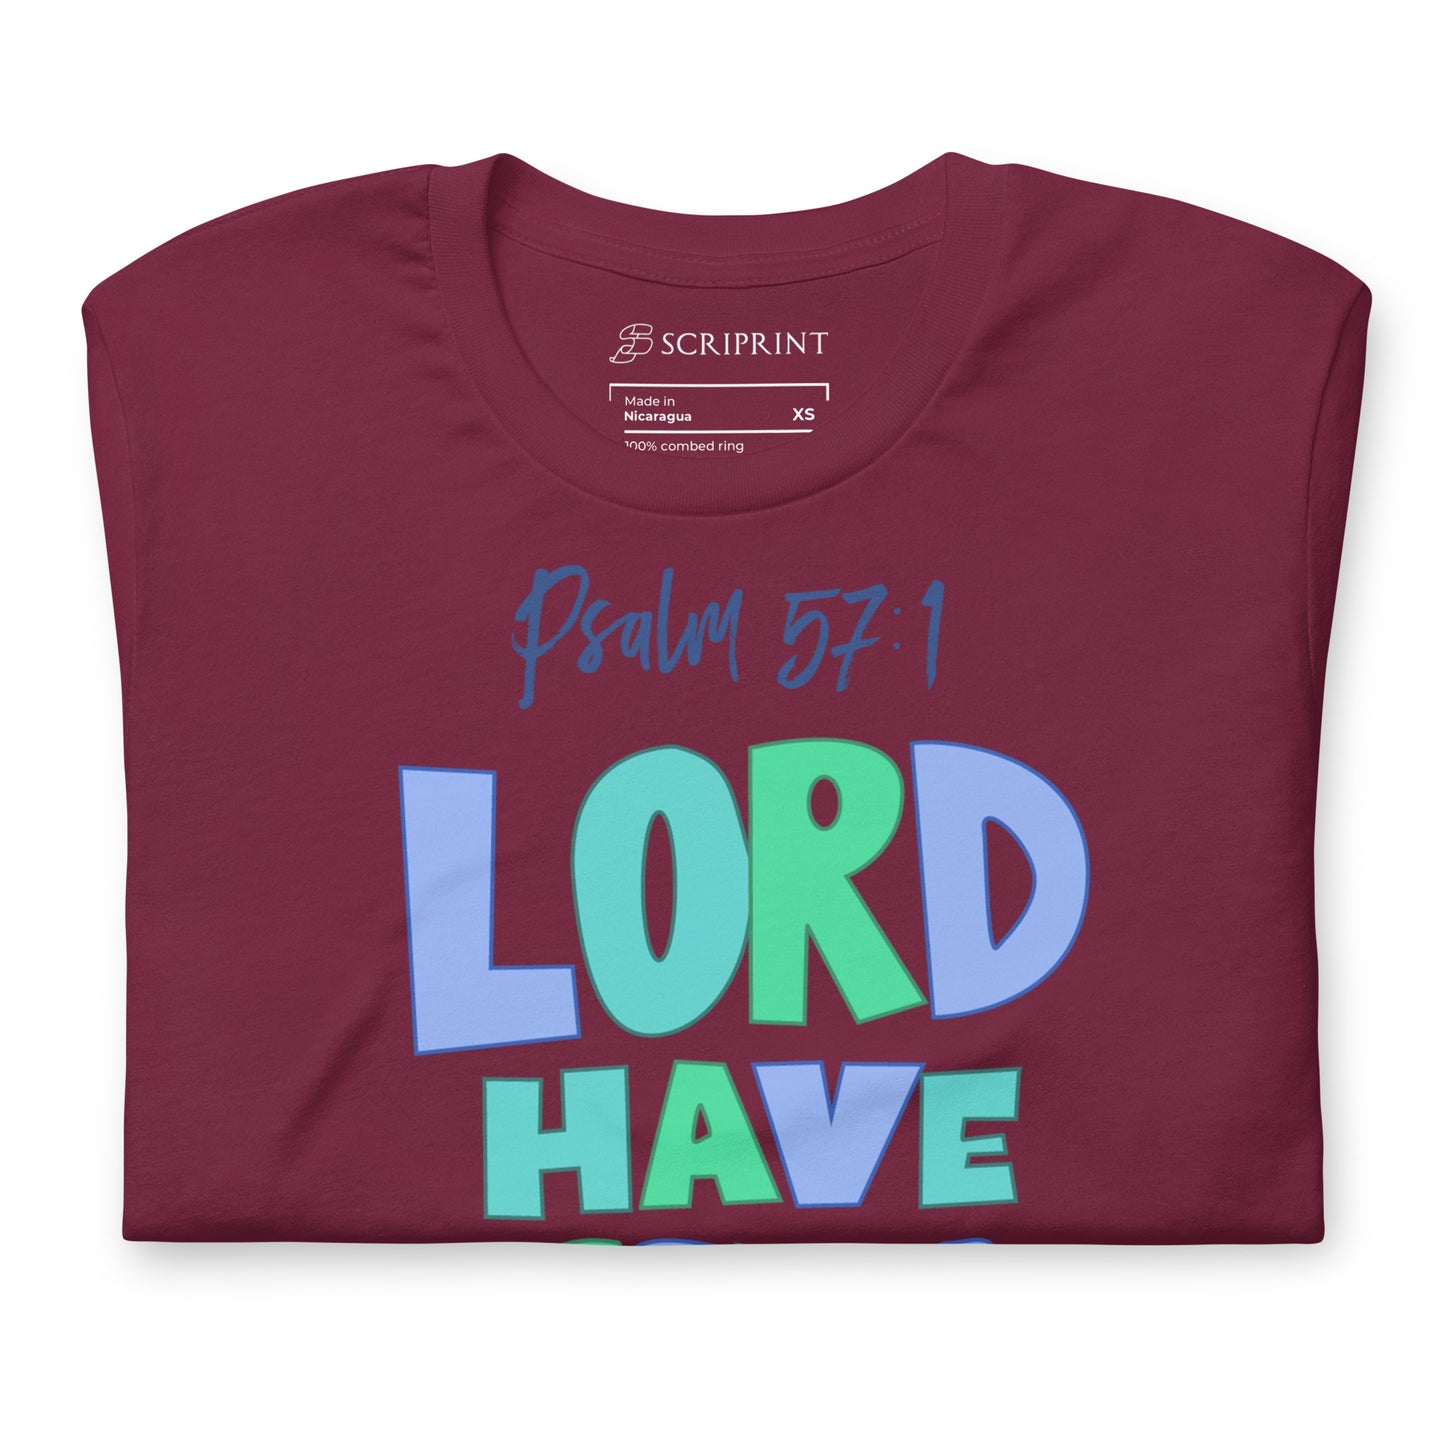 Lord Have Mercy Women's T-Shirt